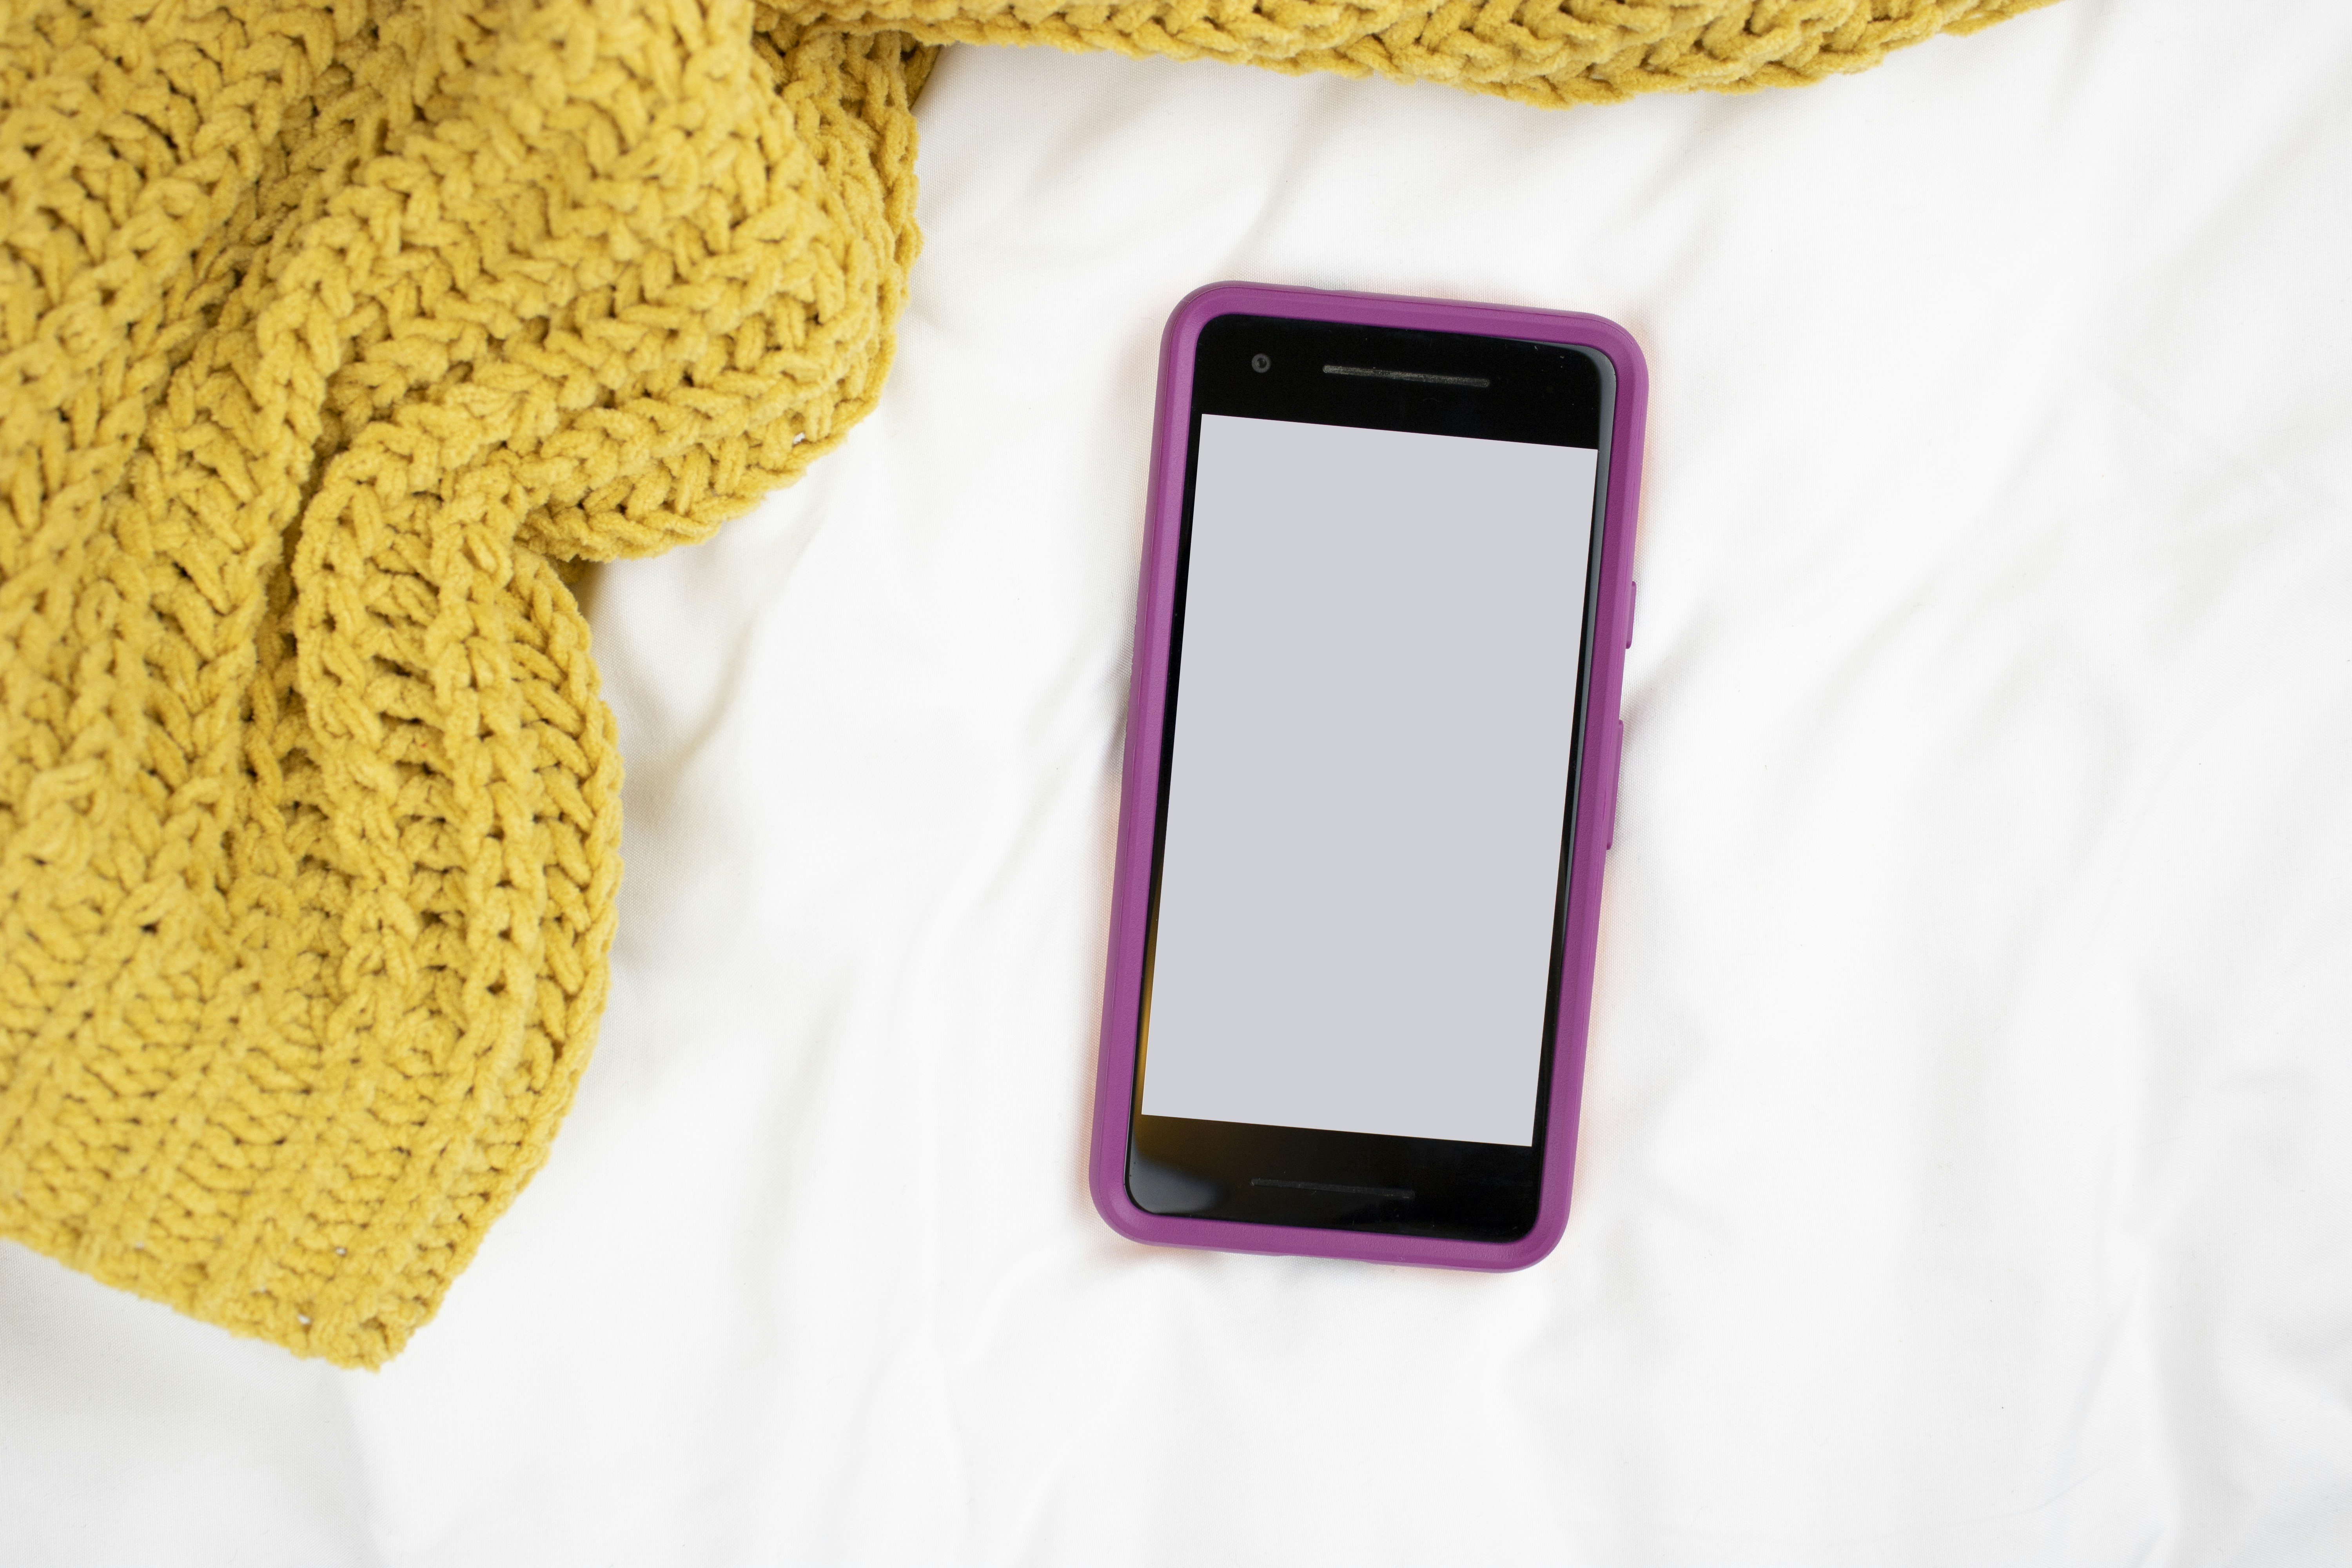 Cell phone on bed with yellow blanket.